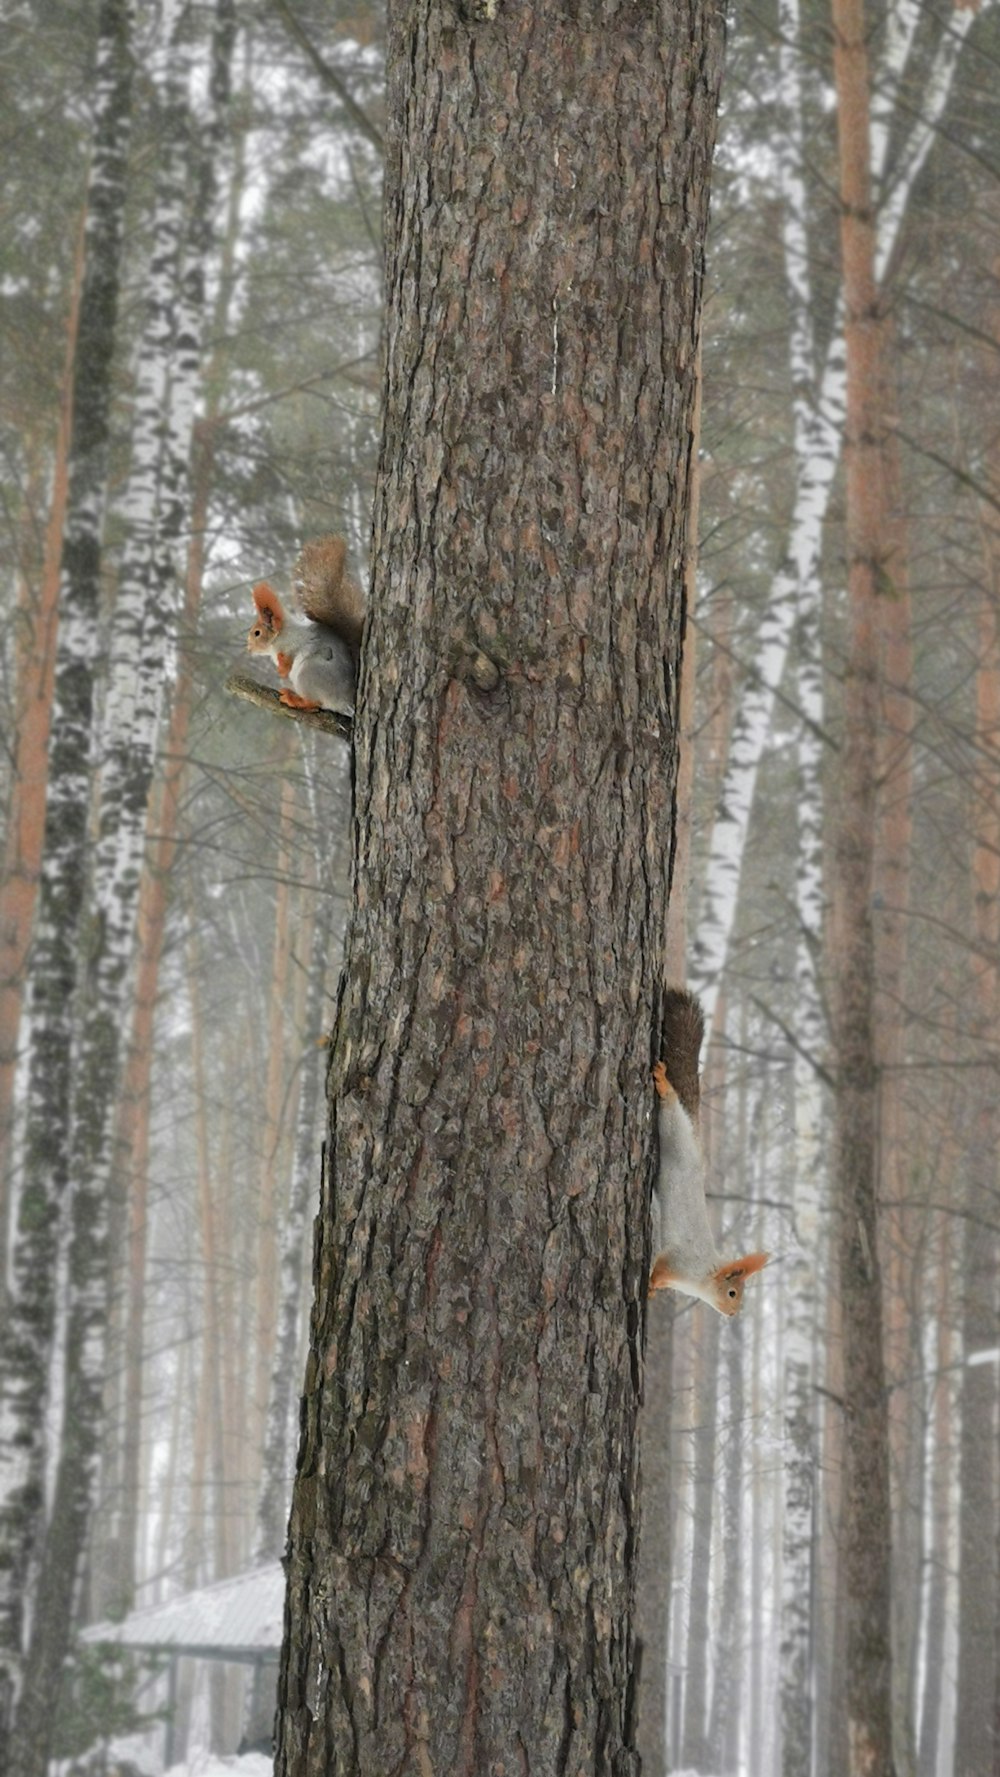 a squirrel climbing up a tree in the woods